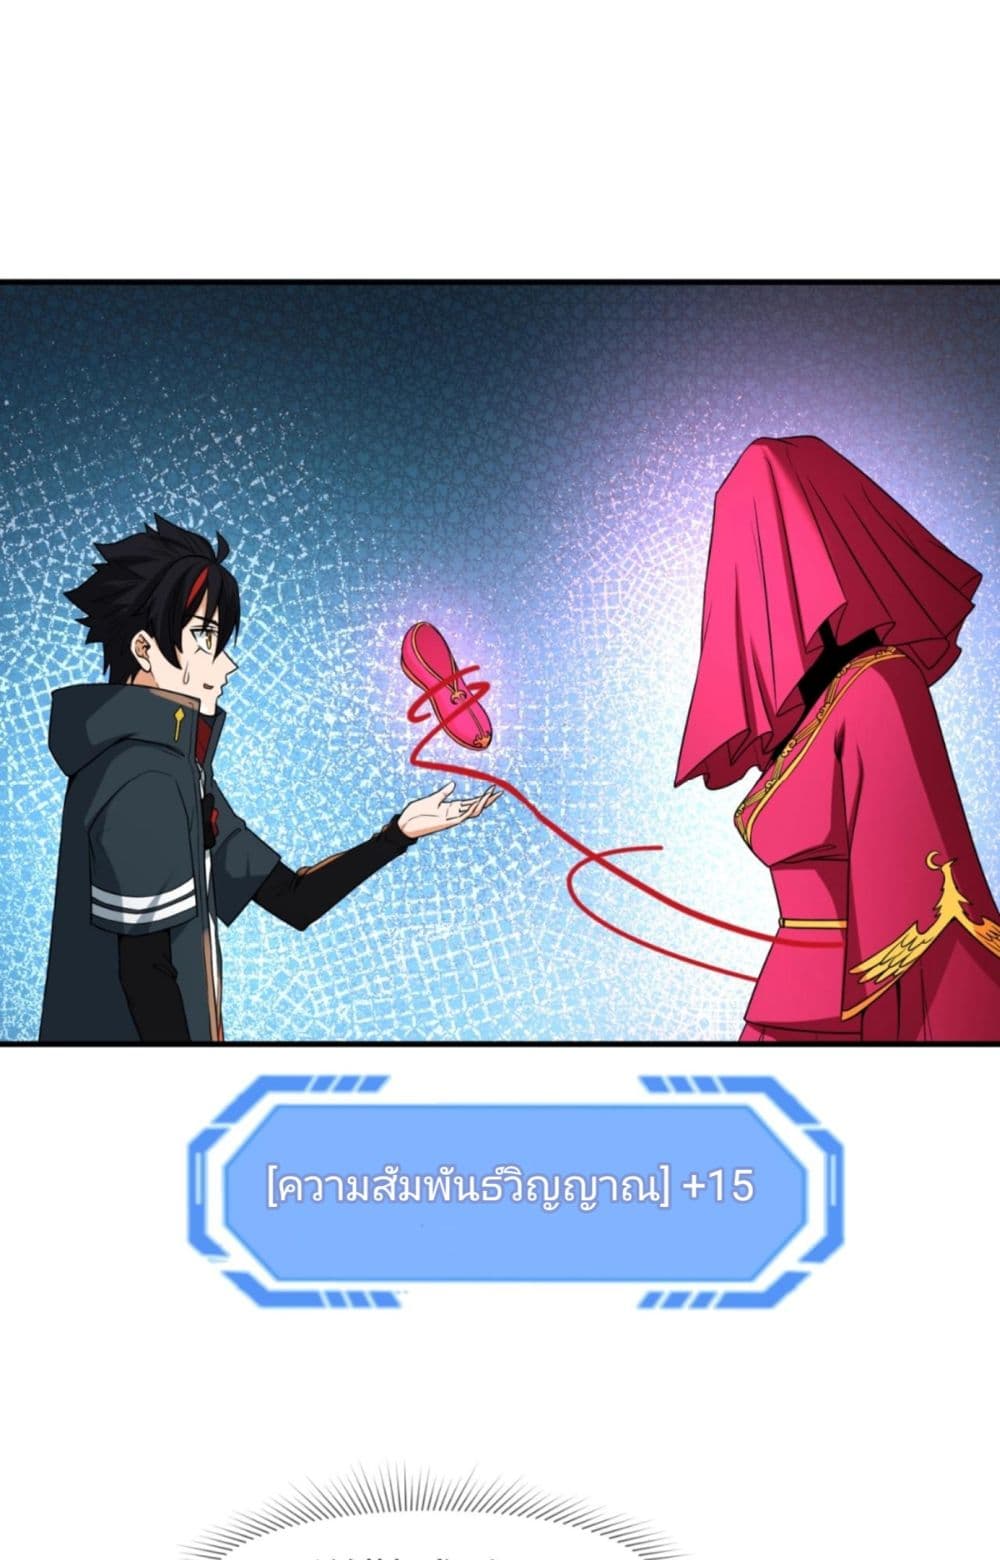 The Age of Ghost Spirits à¸à¸­à¸à¸à¸µà¹ 13 (34)